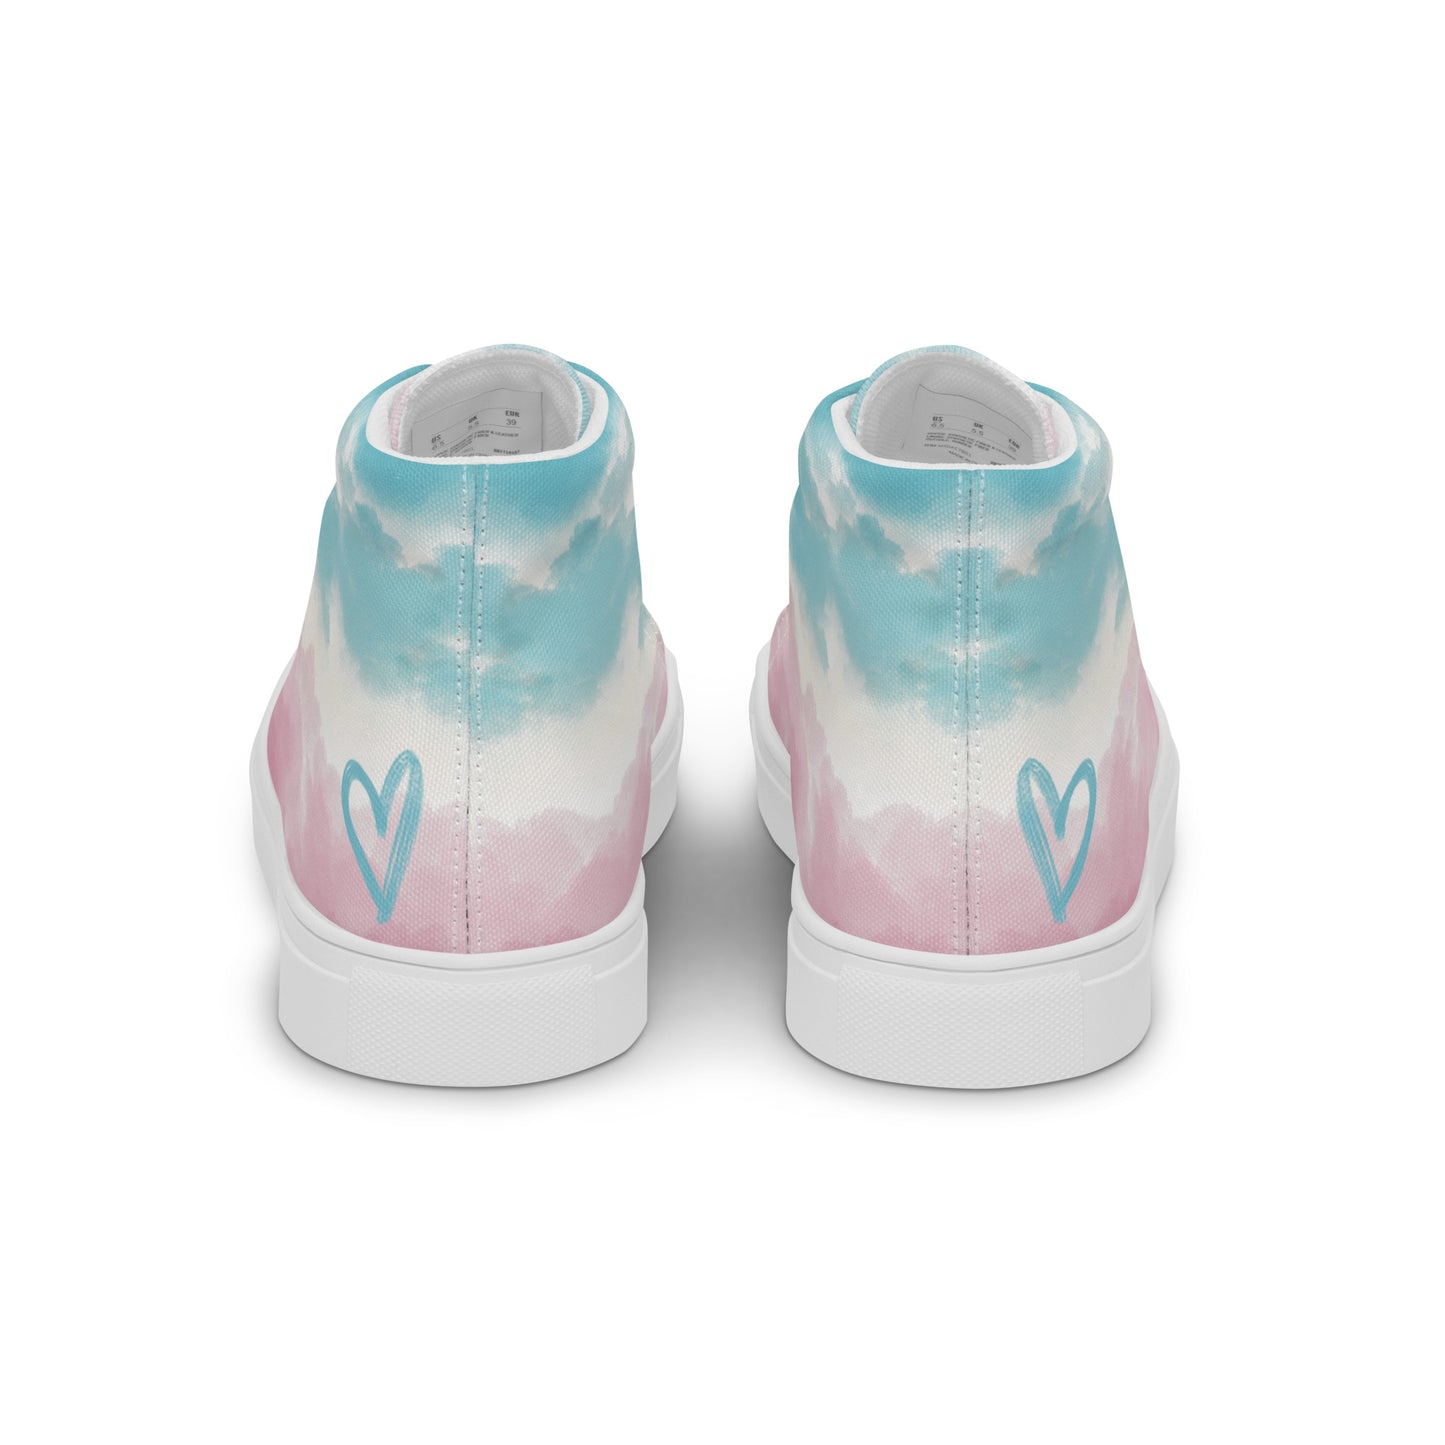 Back view: High top shoes with a cloudy design in blue, white, and pink has a doodle style heart on the heel, white shoe laces, and white details.